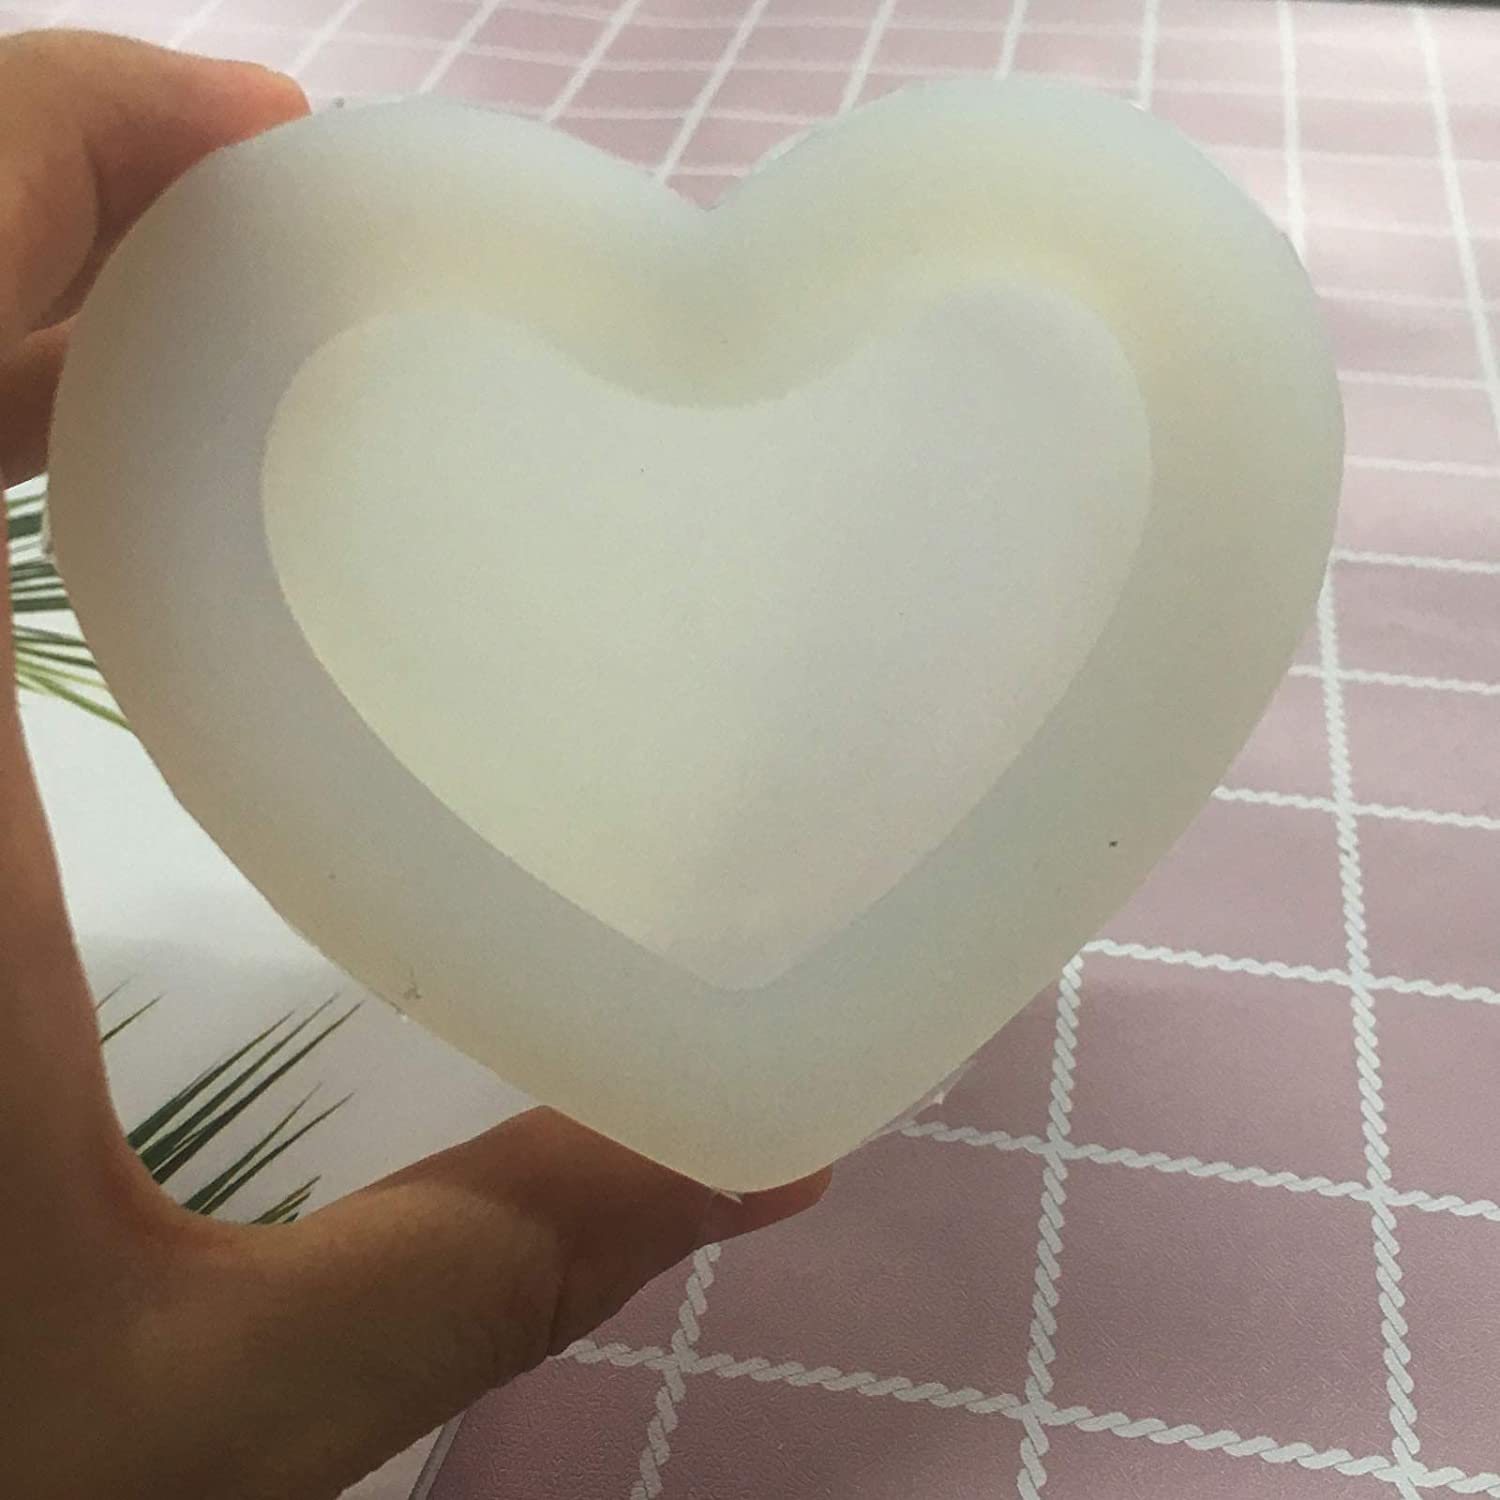 3D Heart Shapes Mirror Silicone Mold for Epoxy Uv Resin Front Cover Makeing  Filling Handcraft Gifts